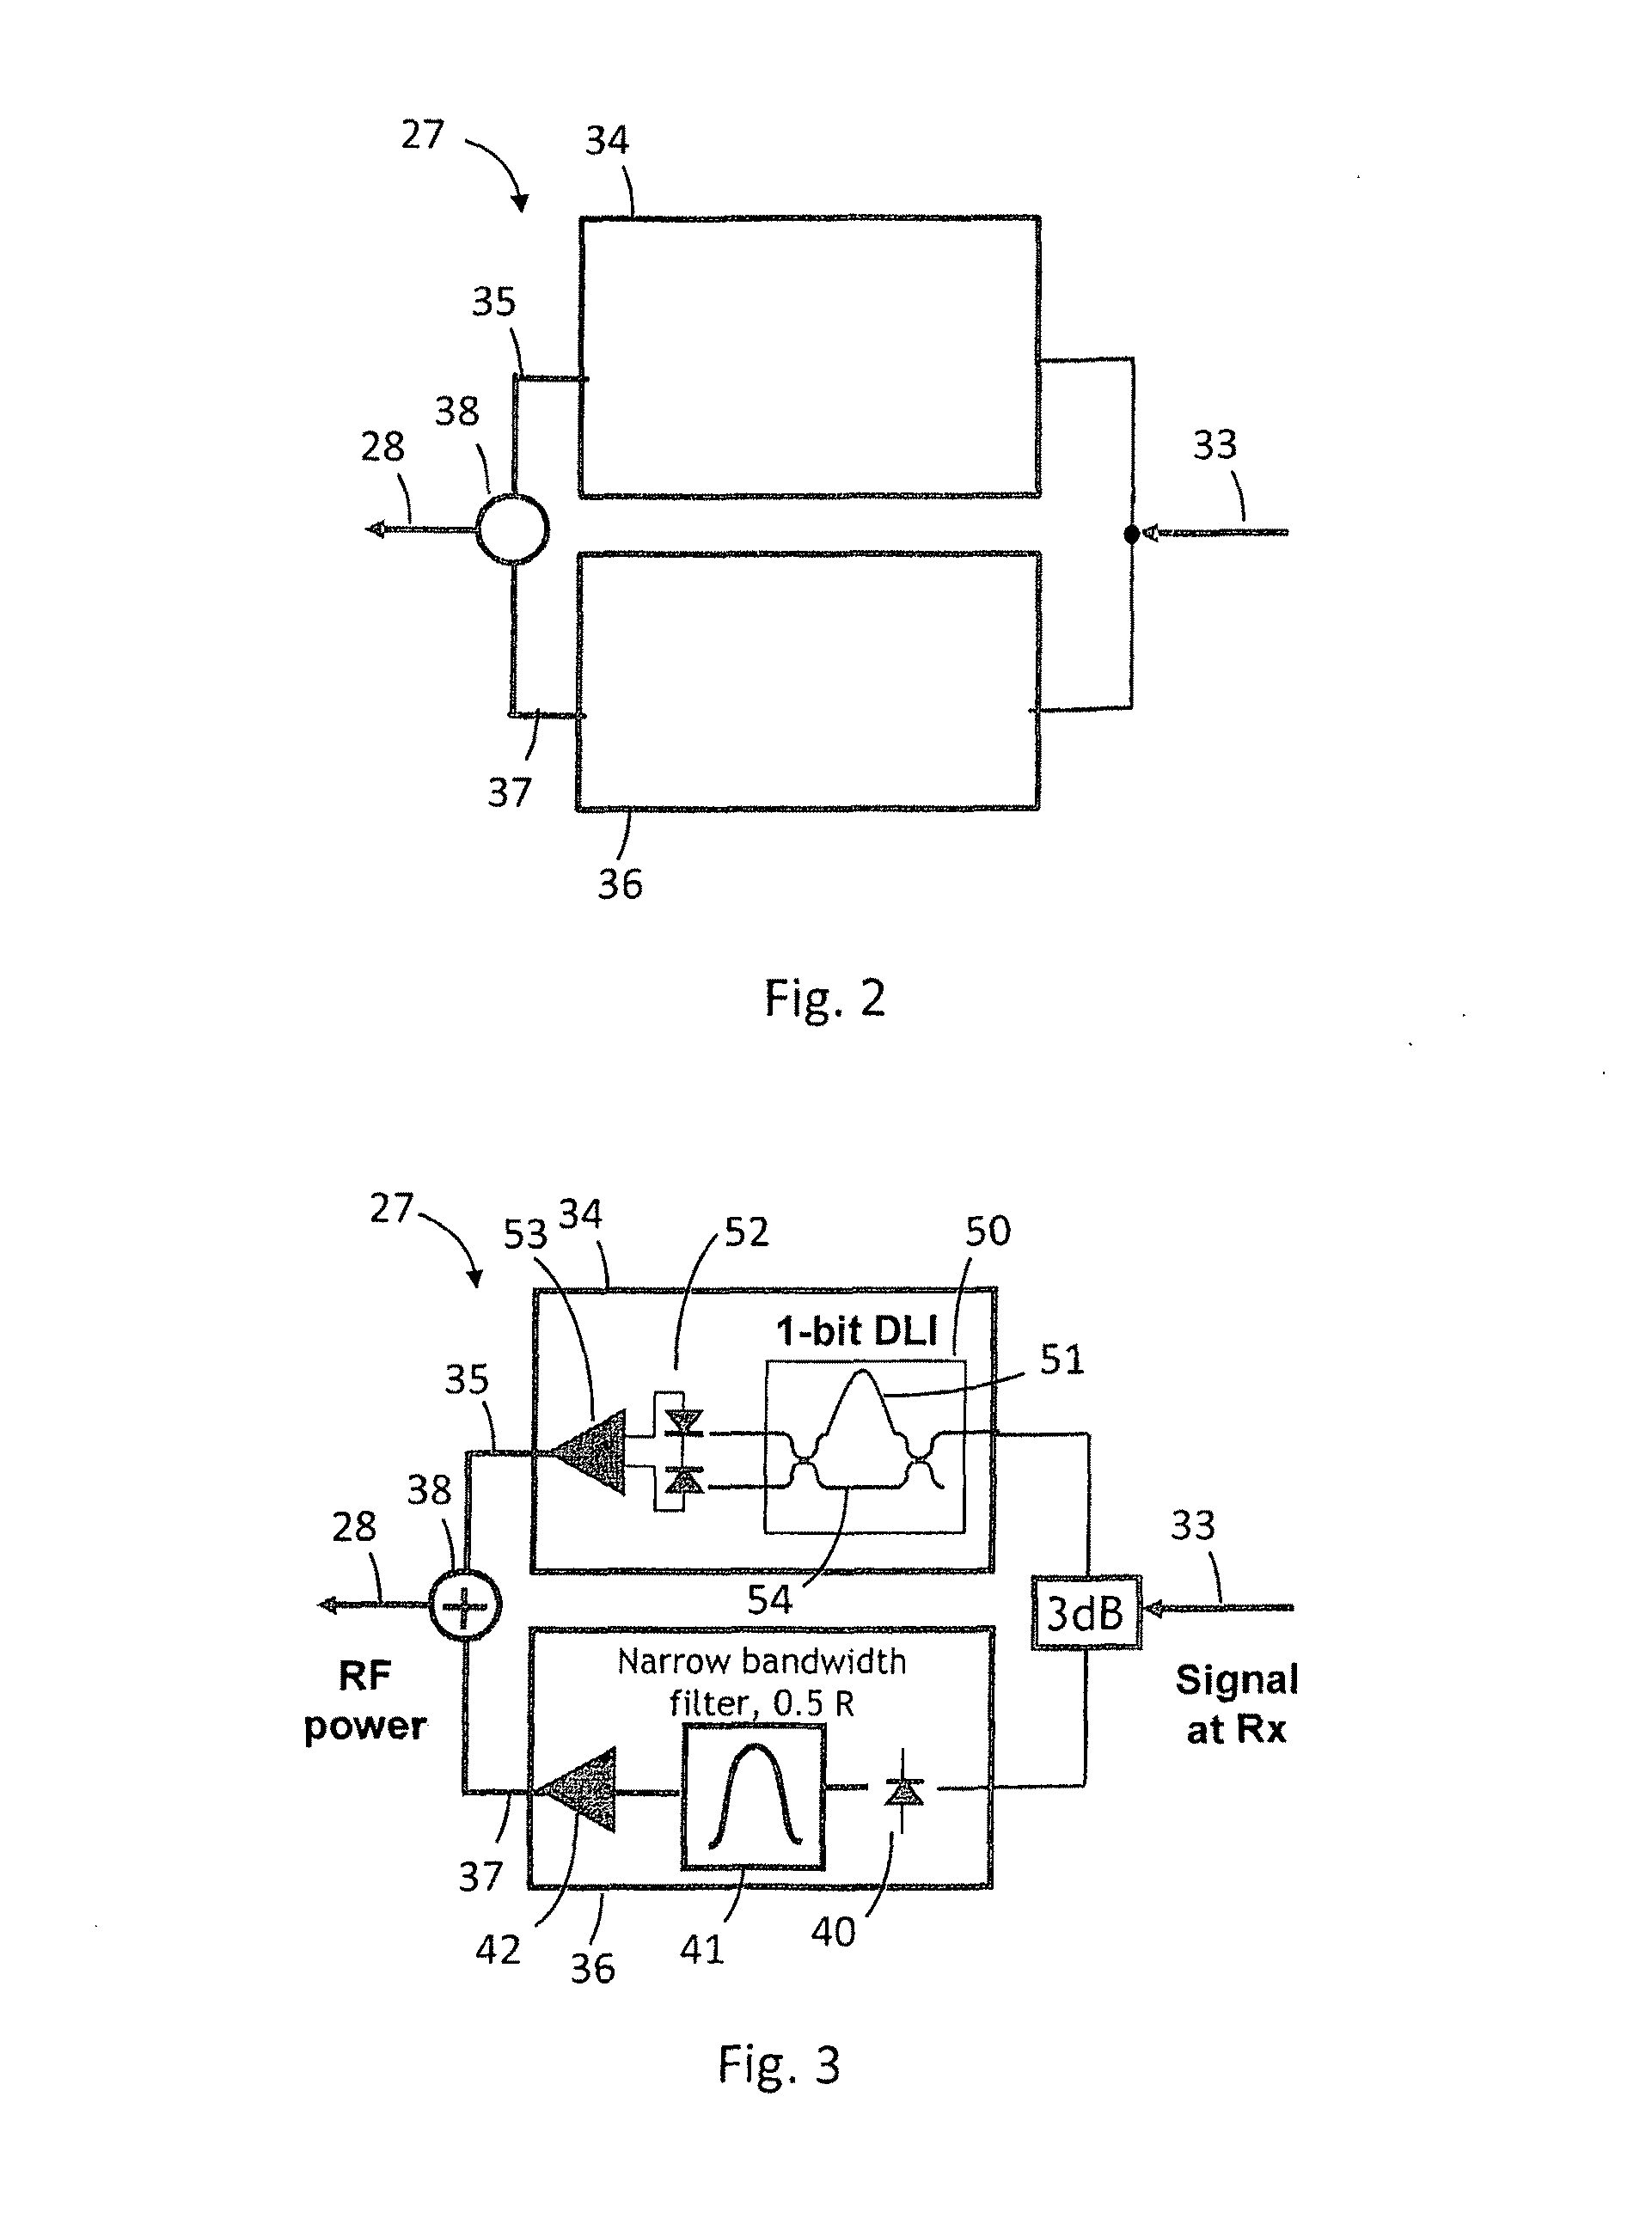 Generation of a feedback signal for a polarization mode dispersion compensator in a communication system using alternate-polarization